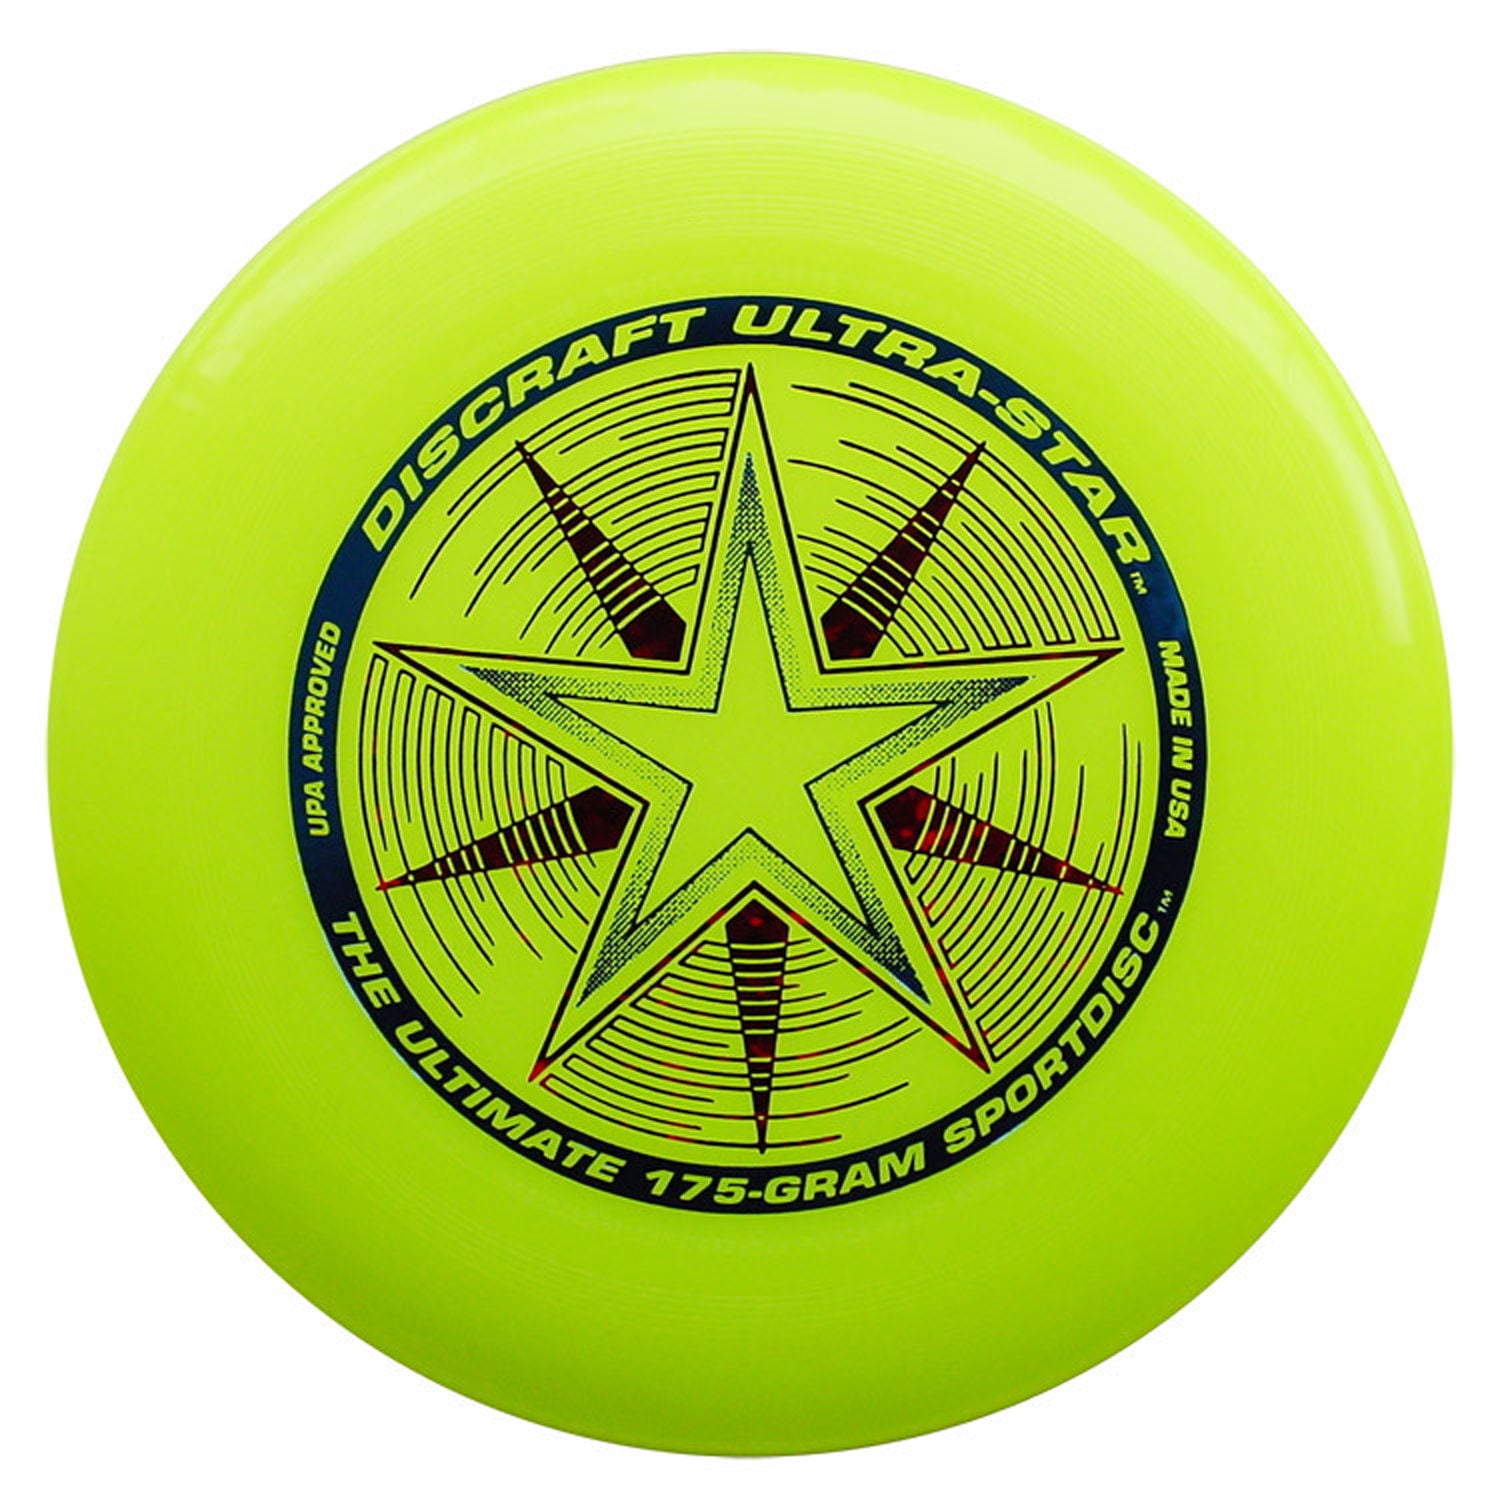 Wham-O Ultimate Frisbee 175g Sports Disc Blue and White for sale online 